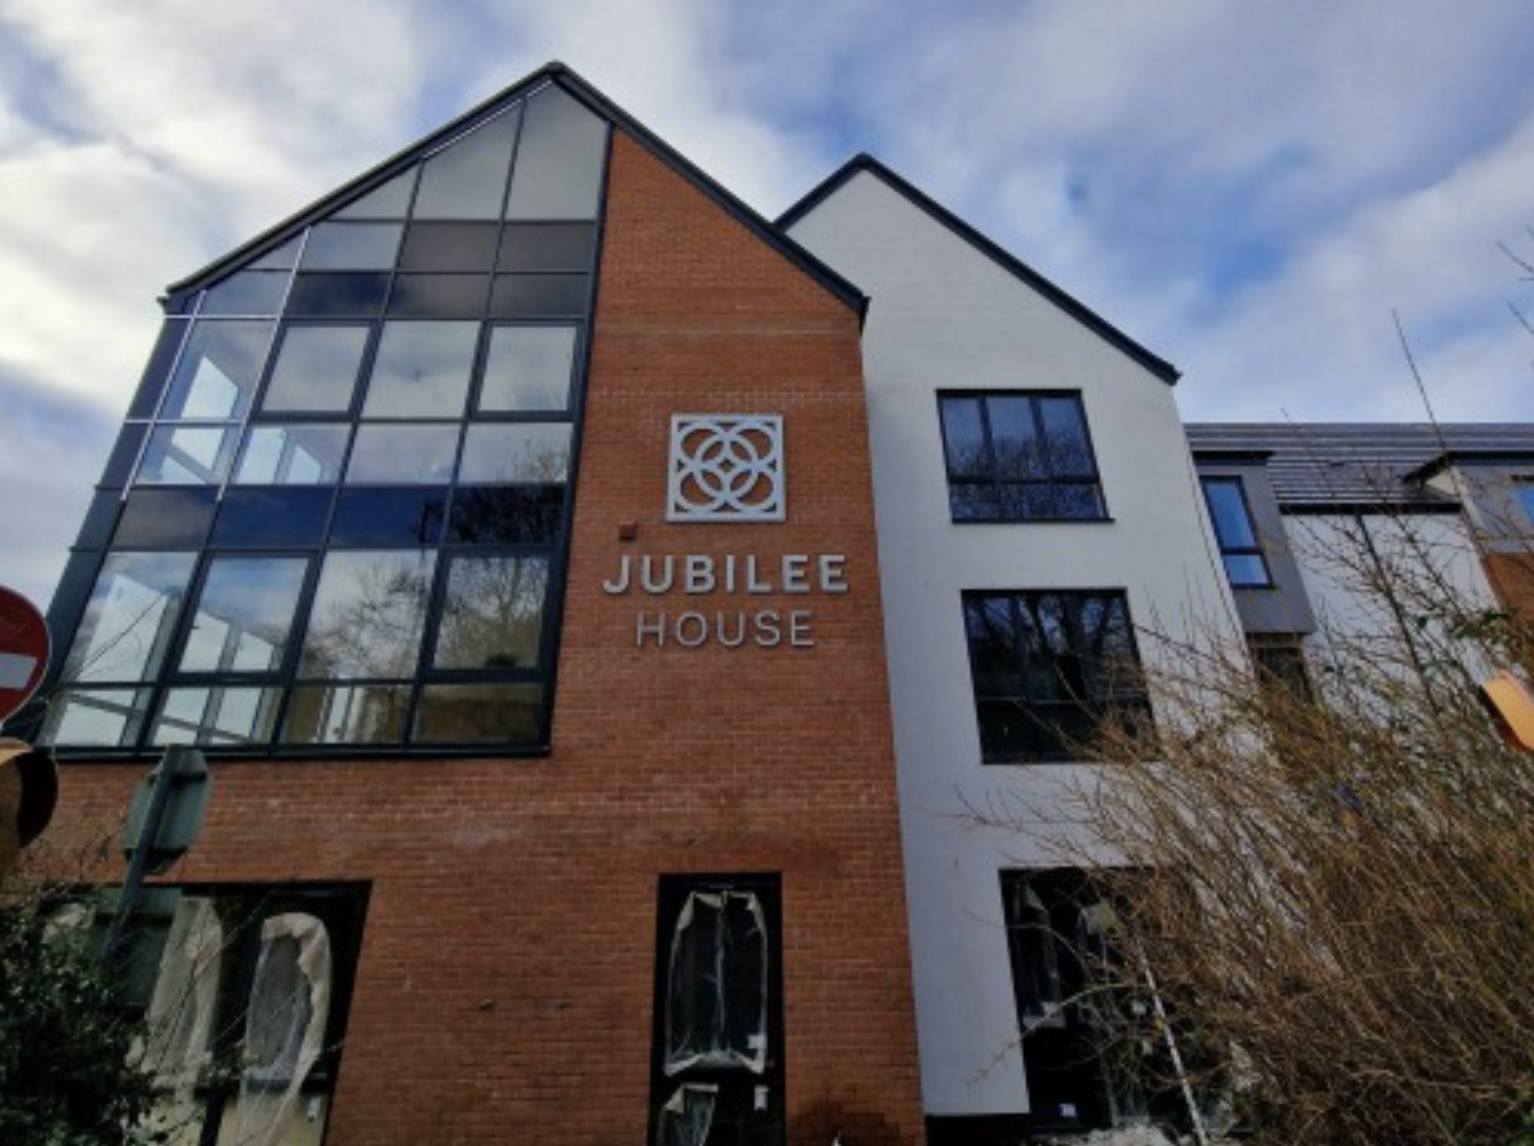 Exterior of Jubilee House care home in Leamington Spa, West Midlands